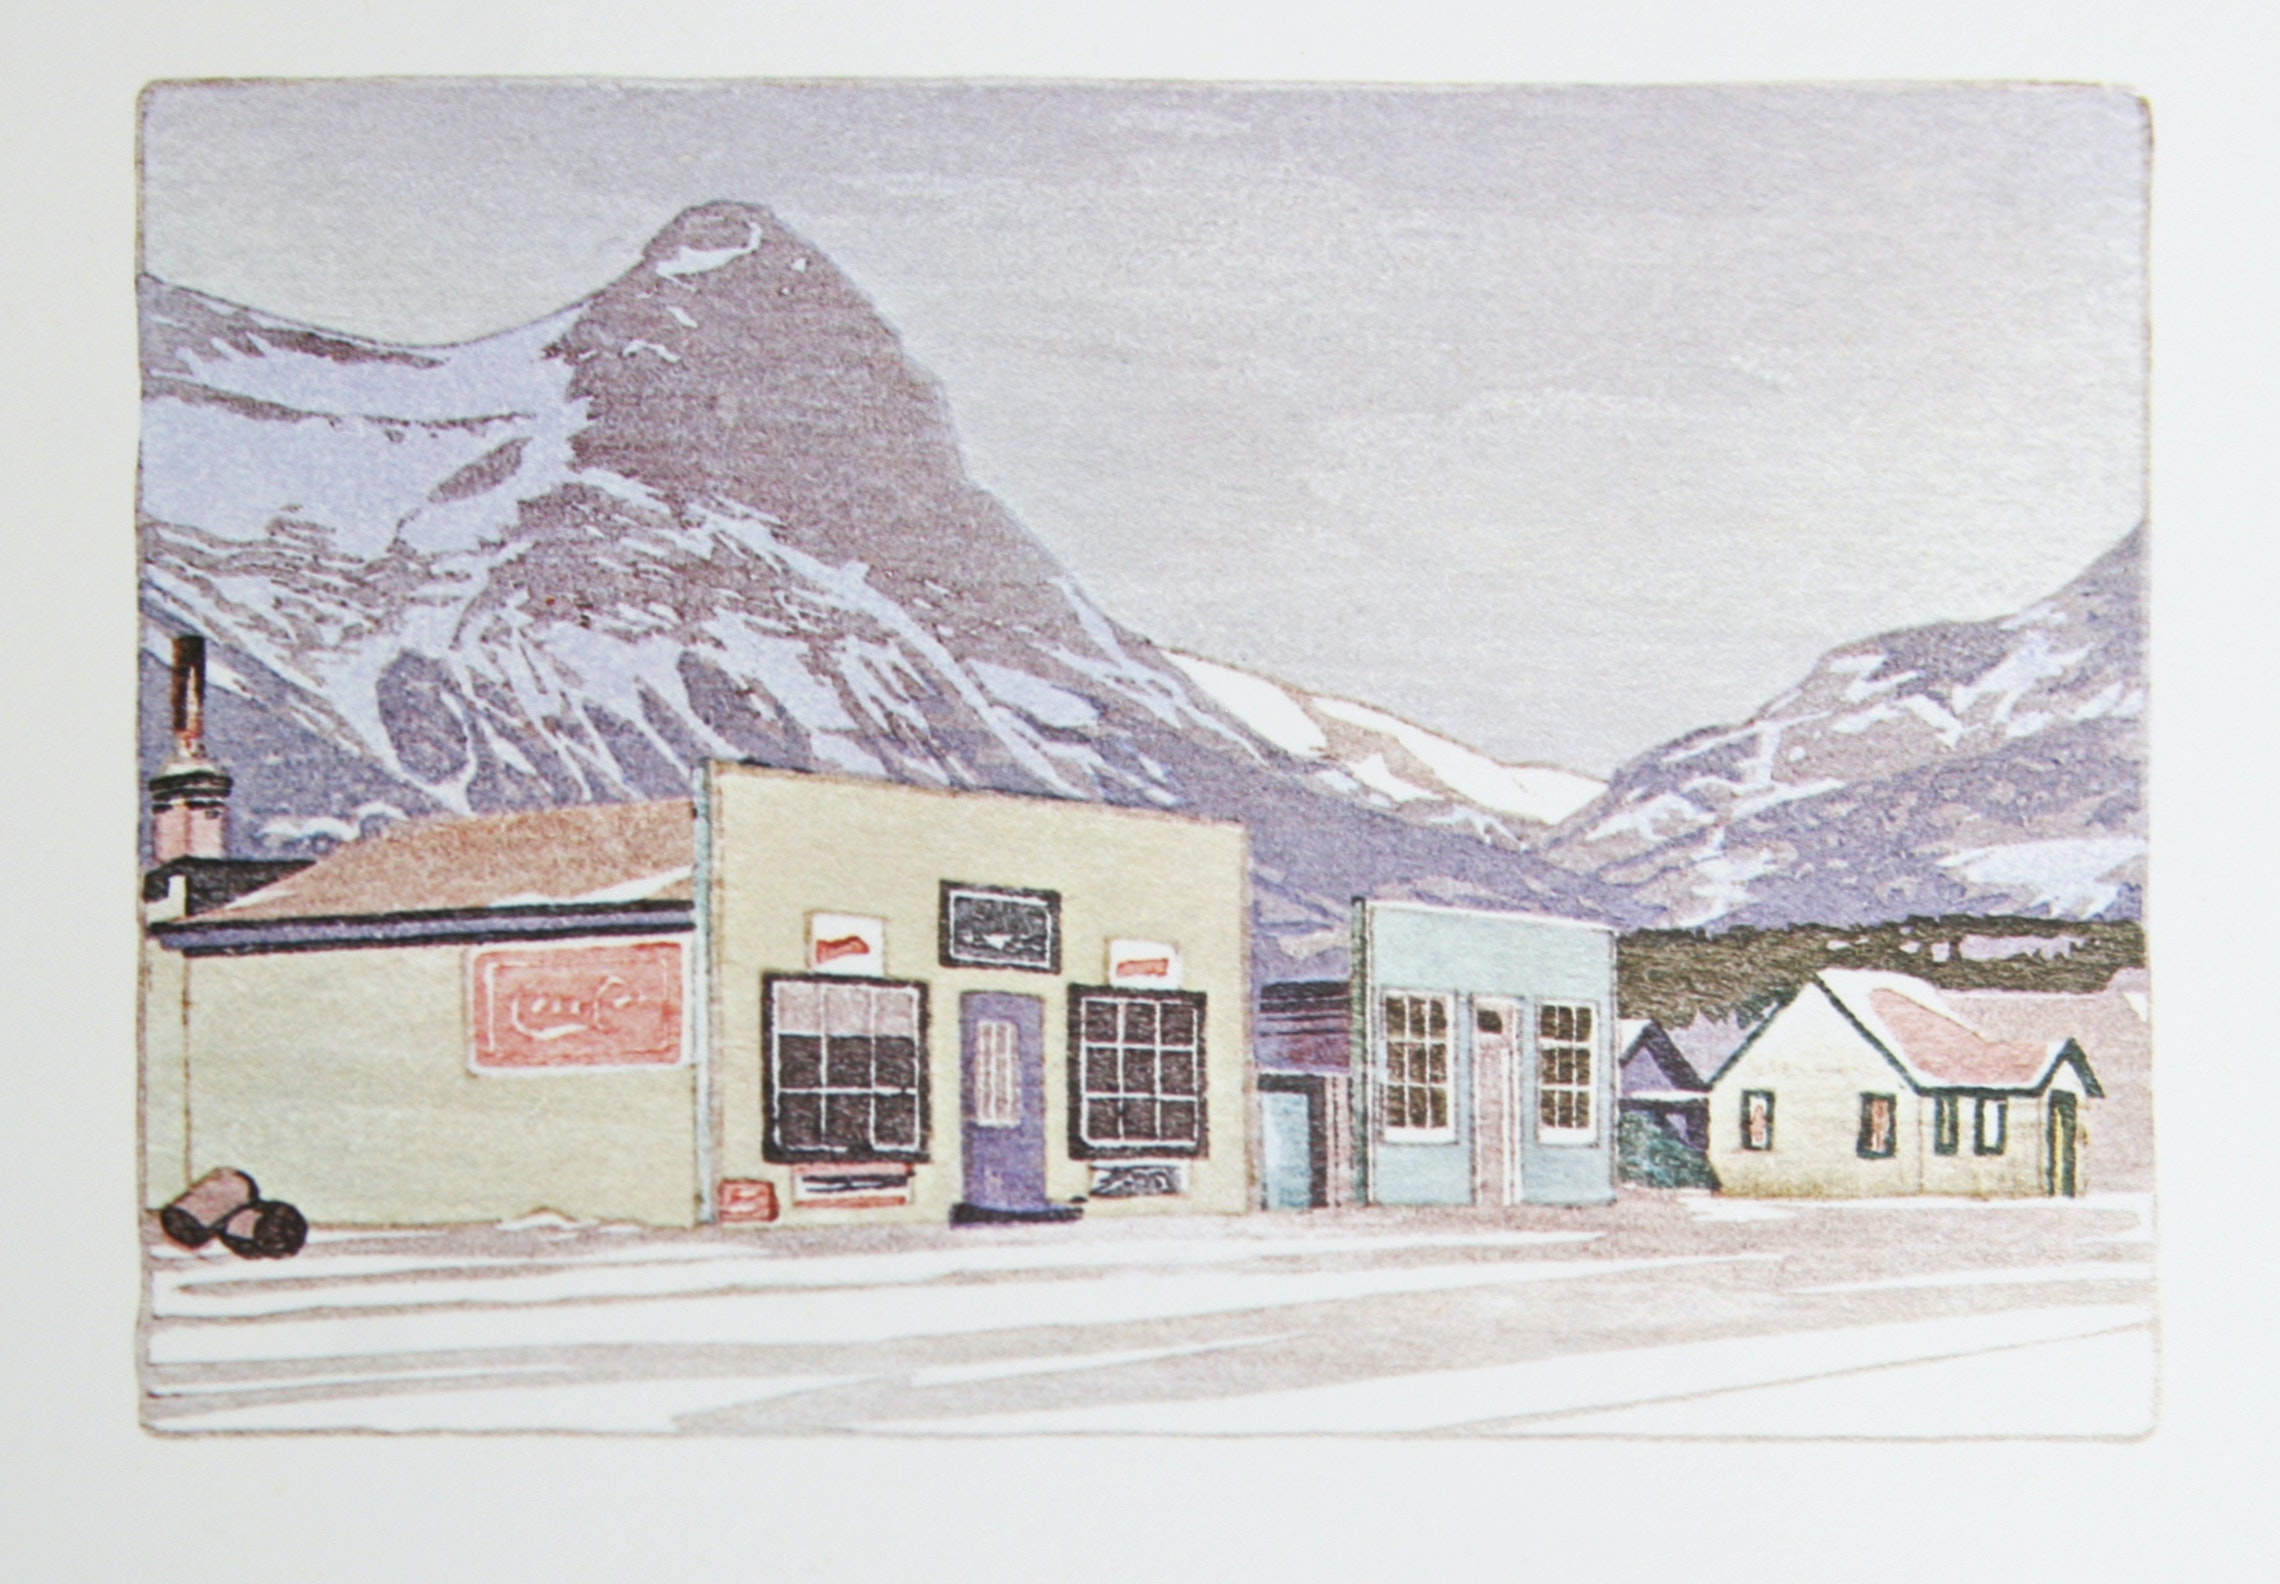 Canmore by WJ Phillips